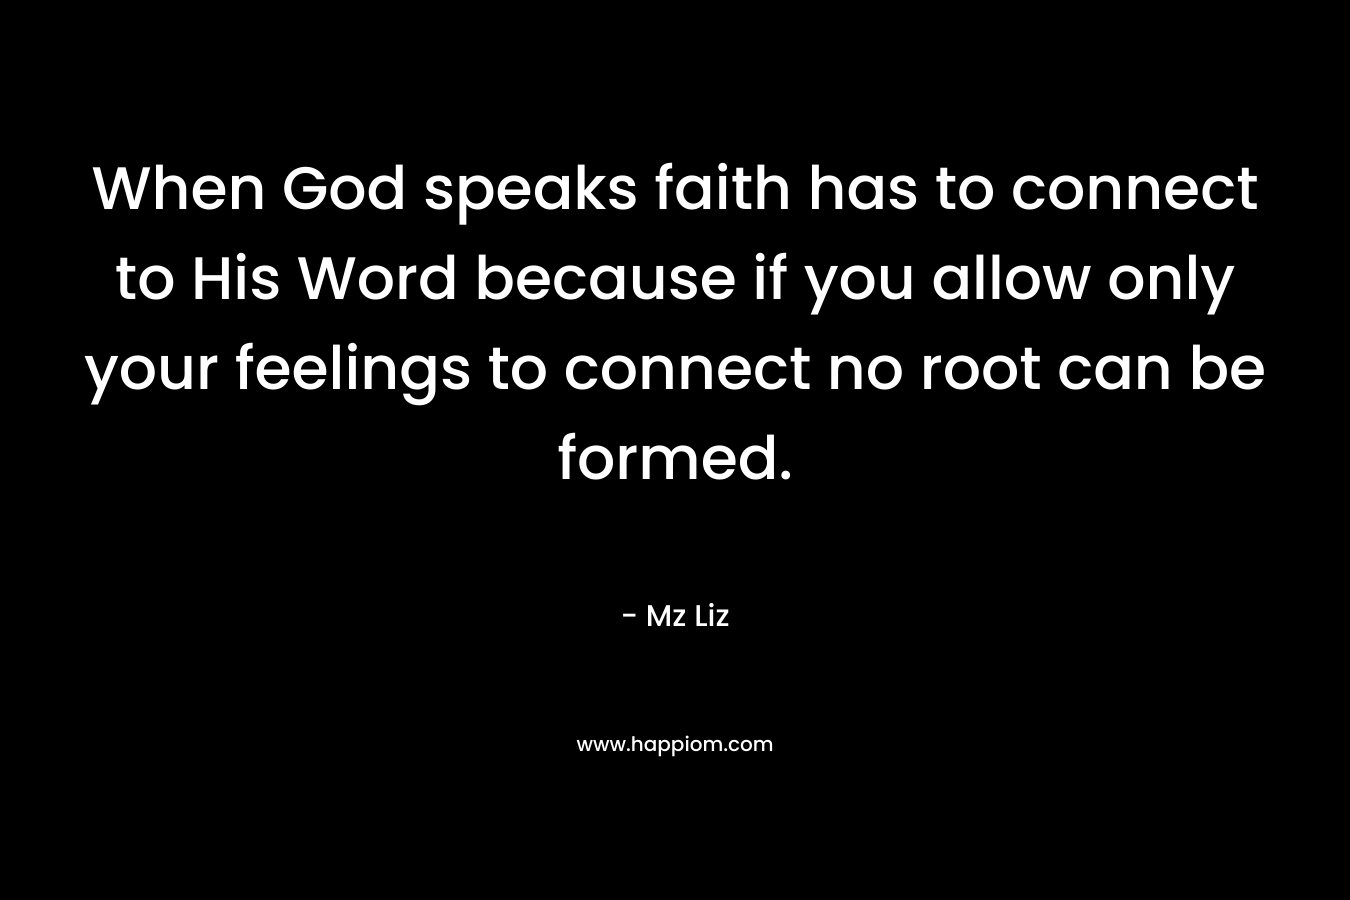 When God speaks faith has to connect to His Word because if you allow only your feelings to connect no root can be formed.